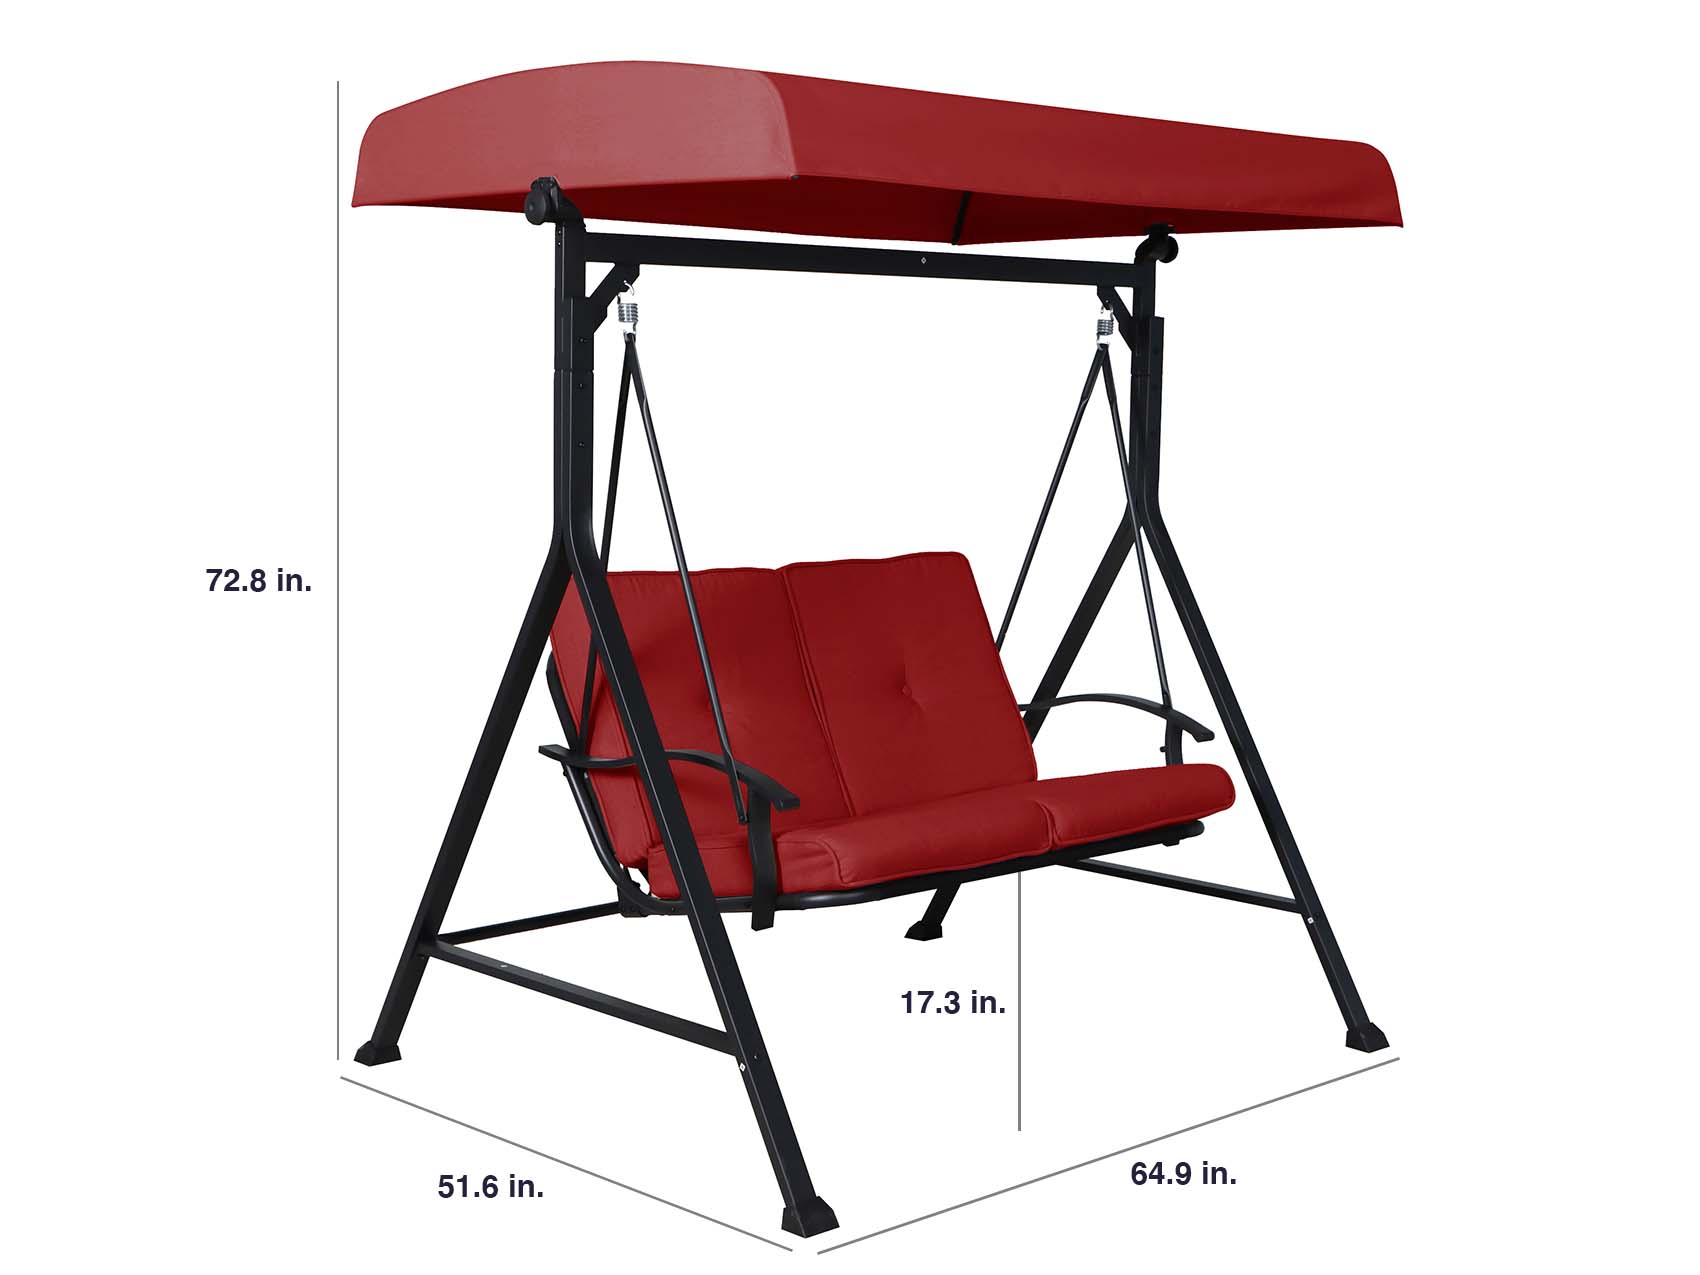 Mainstays Belden Park 2-Person Outdoor Furniture Patio Swing with Canopy, Red - image 5 of 7